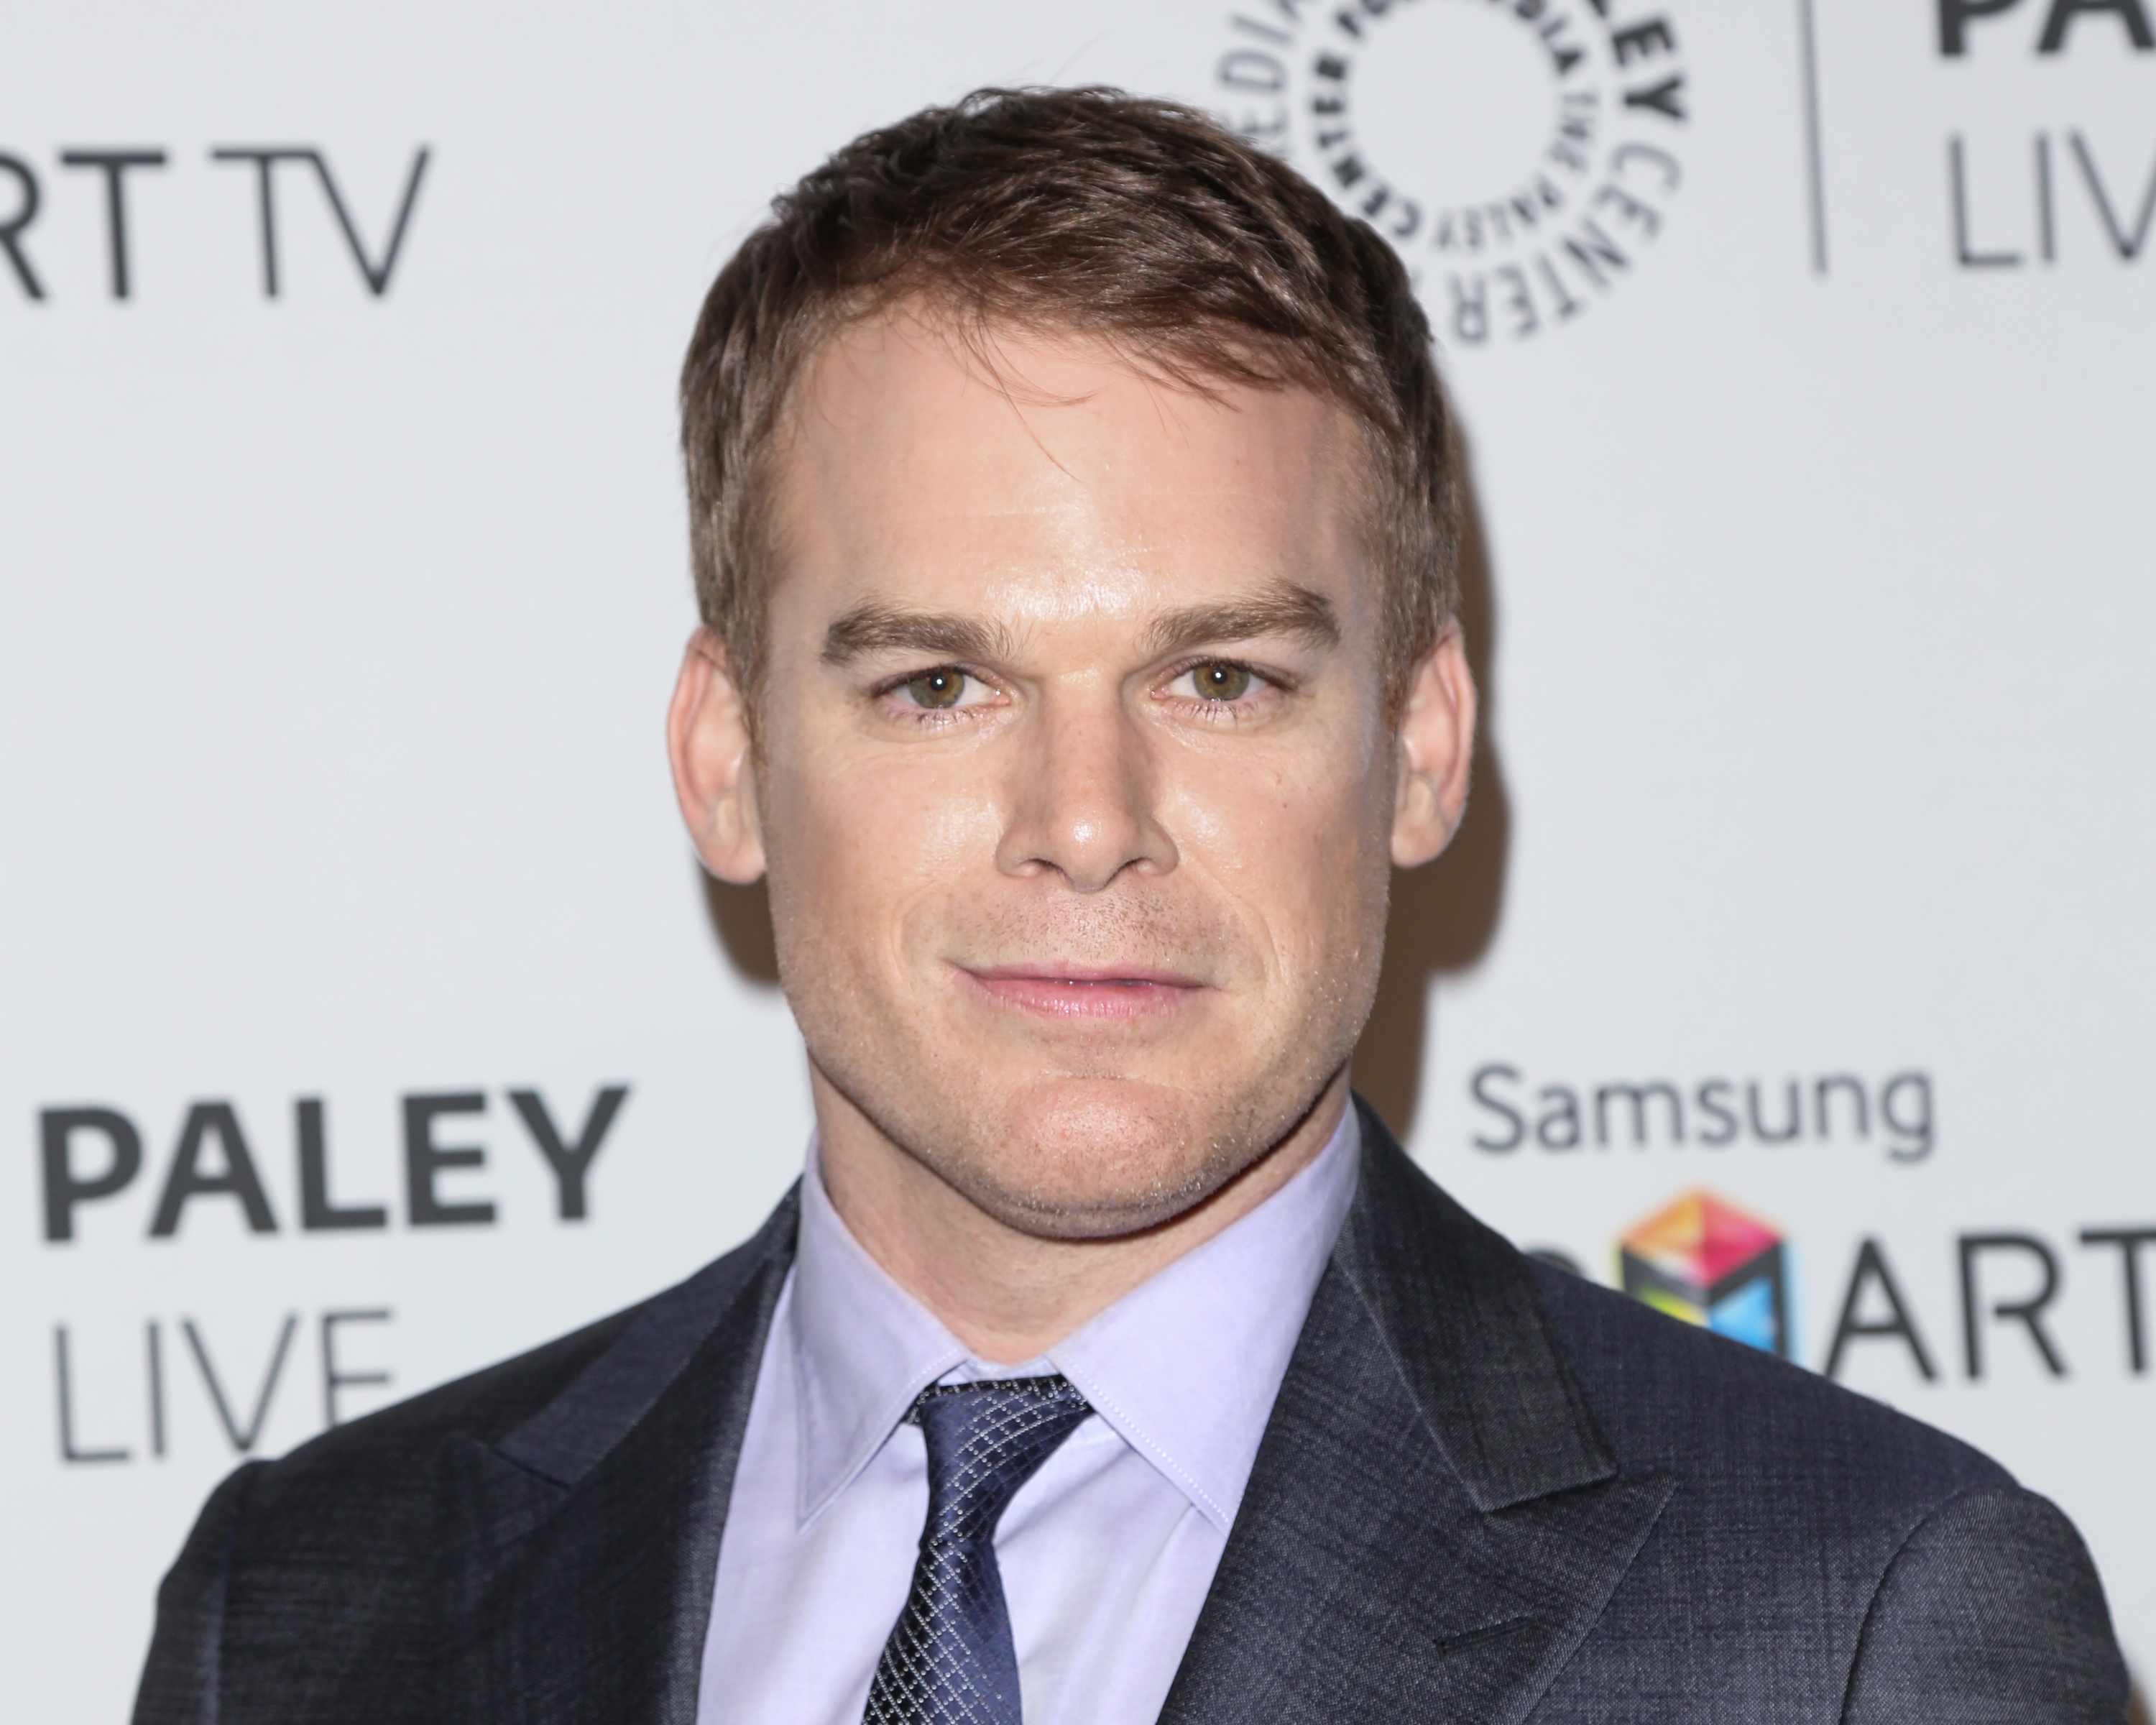 Michael C. Hall attendsattends PaleyFest Previews for 'Dexter.' He is wearing a suit jacket, lilac shirt, and dark blue tie.